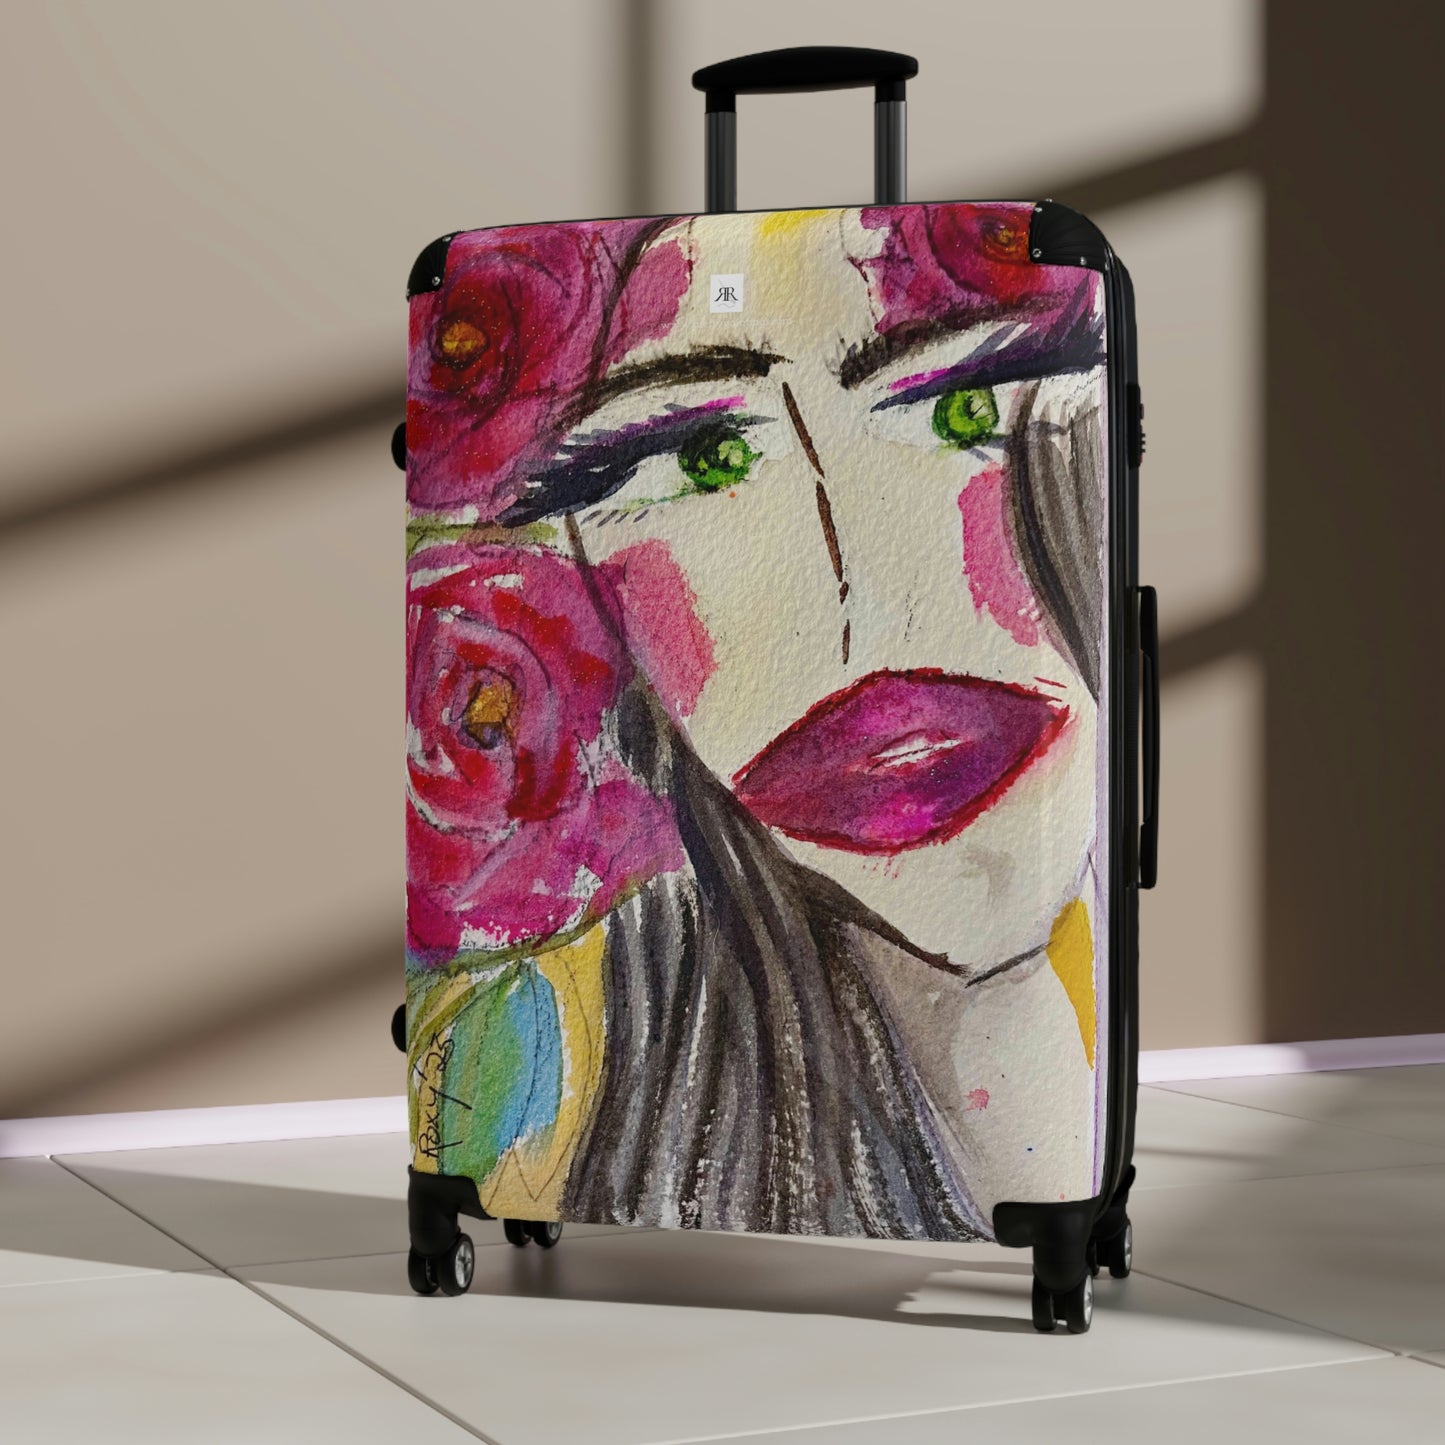 Brunette with Green Eyes "Uh-huh"  Carry on Suitcase